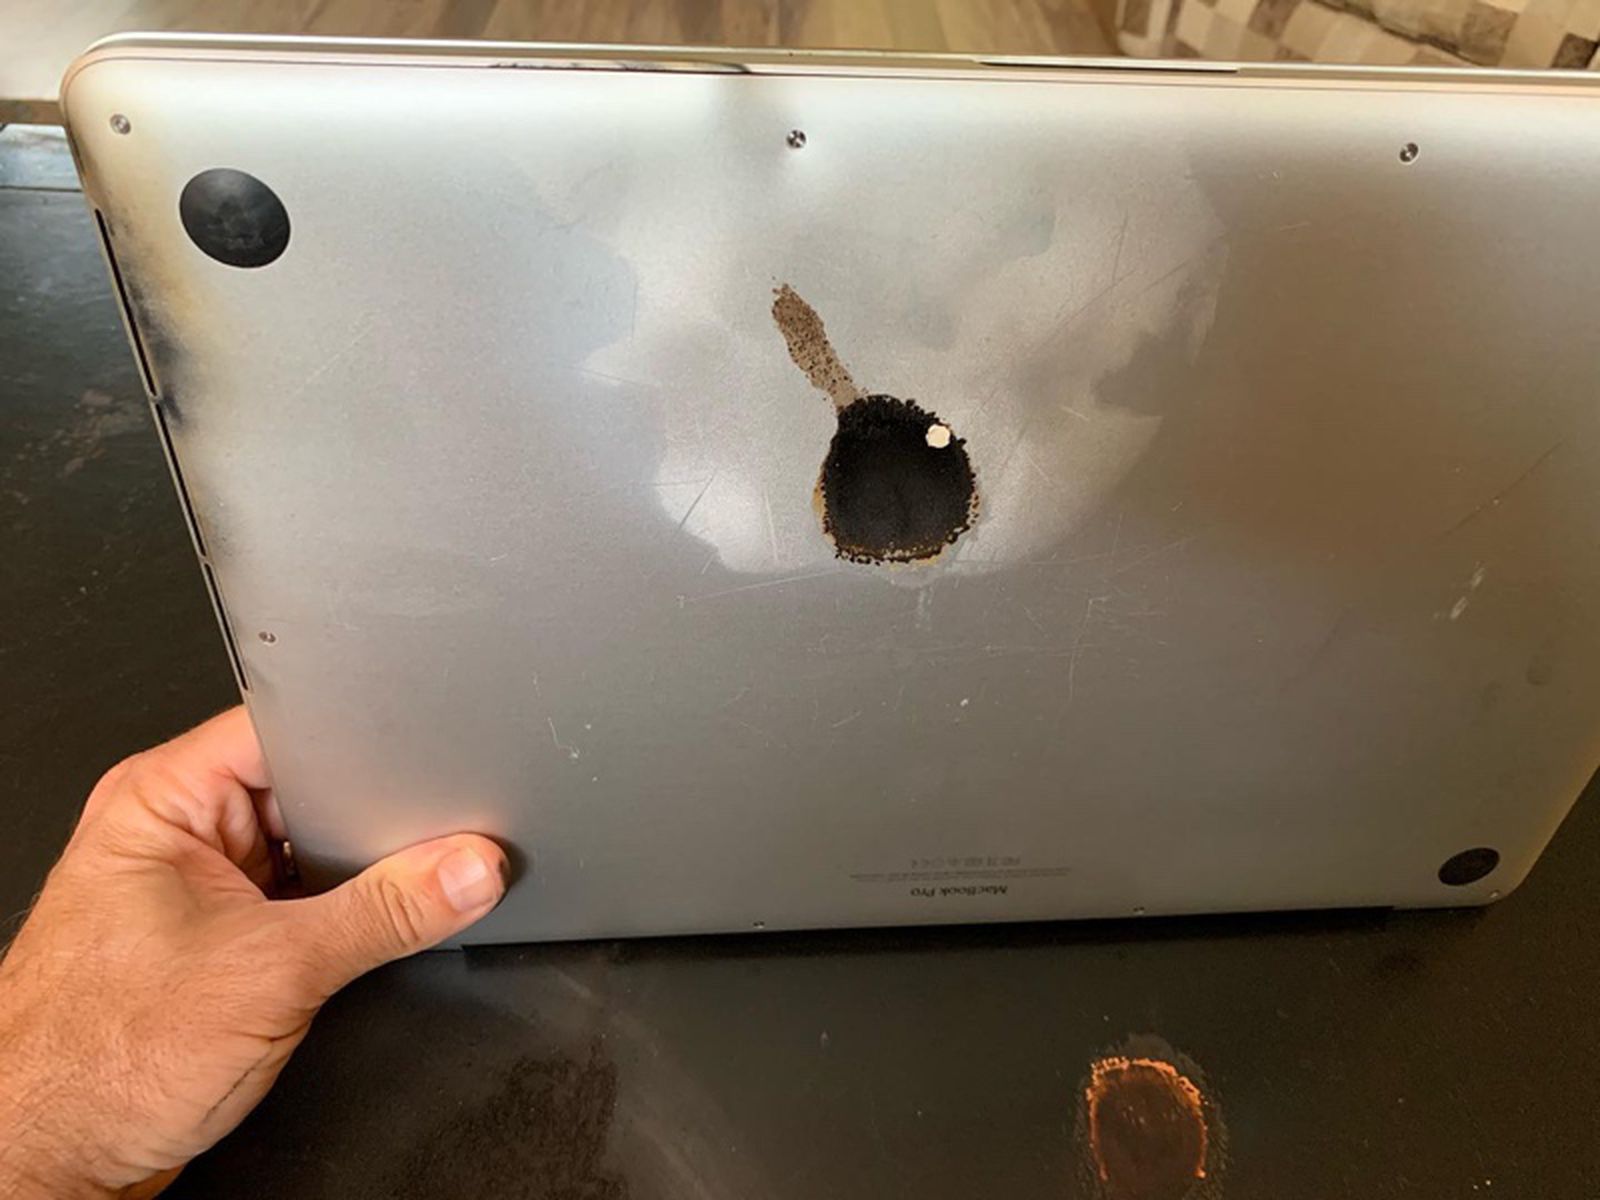 Damaged 15-Inch 2015 MacBook Pro Demonstrates Why Apple Initiated